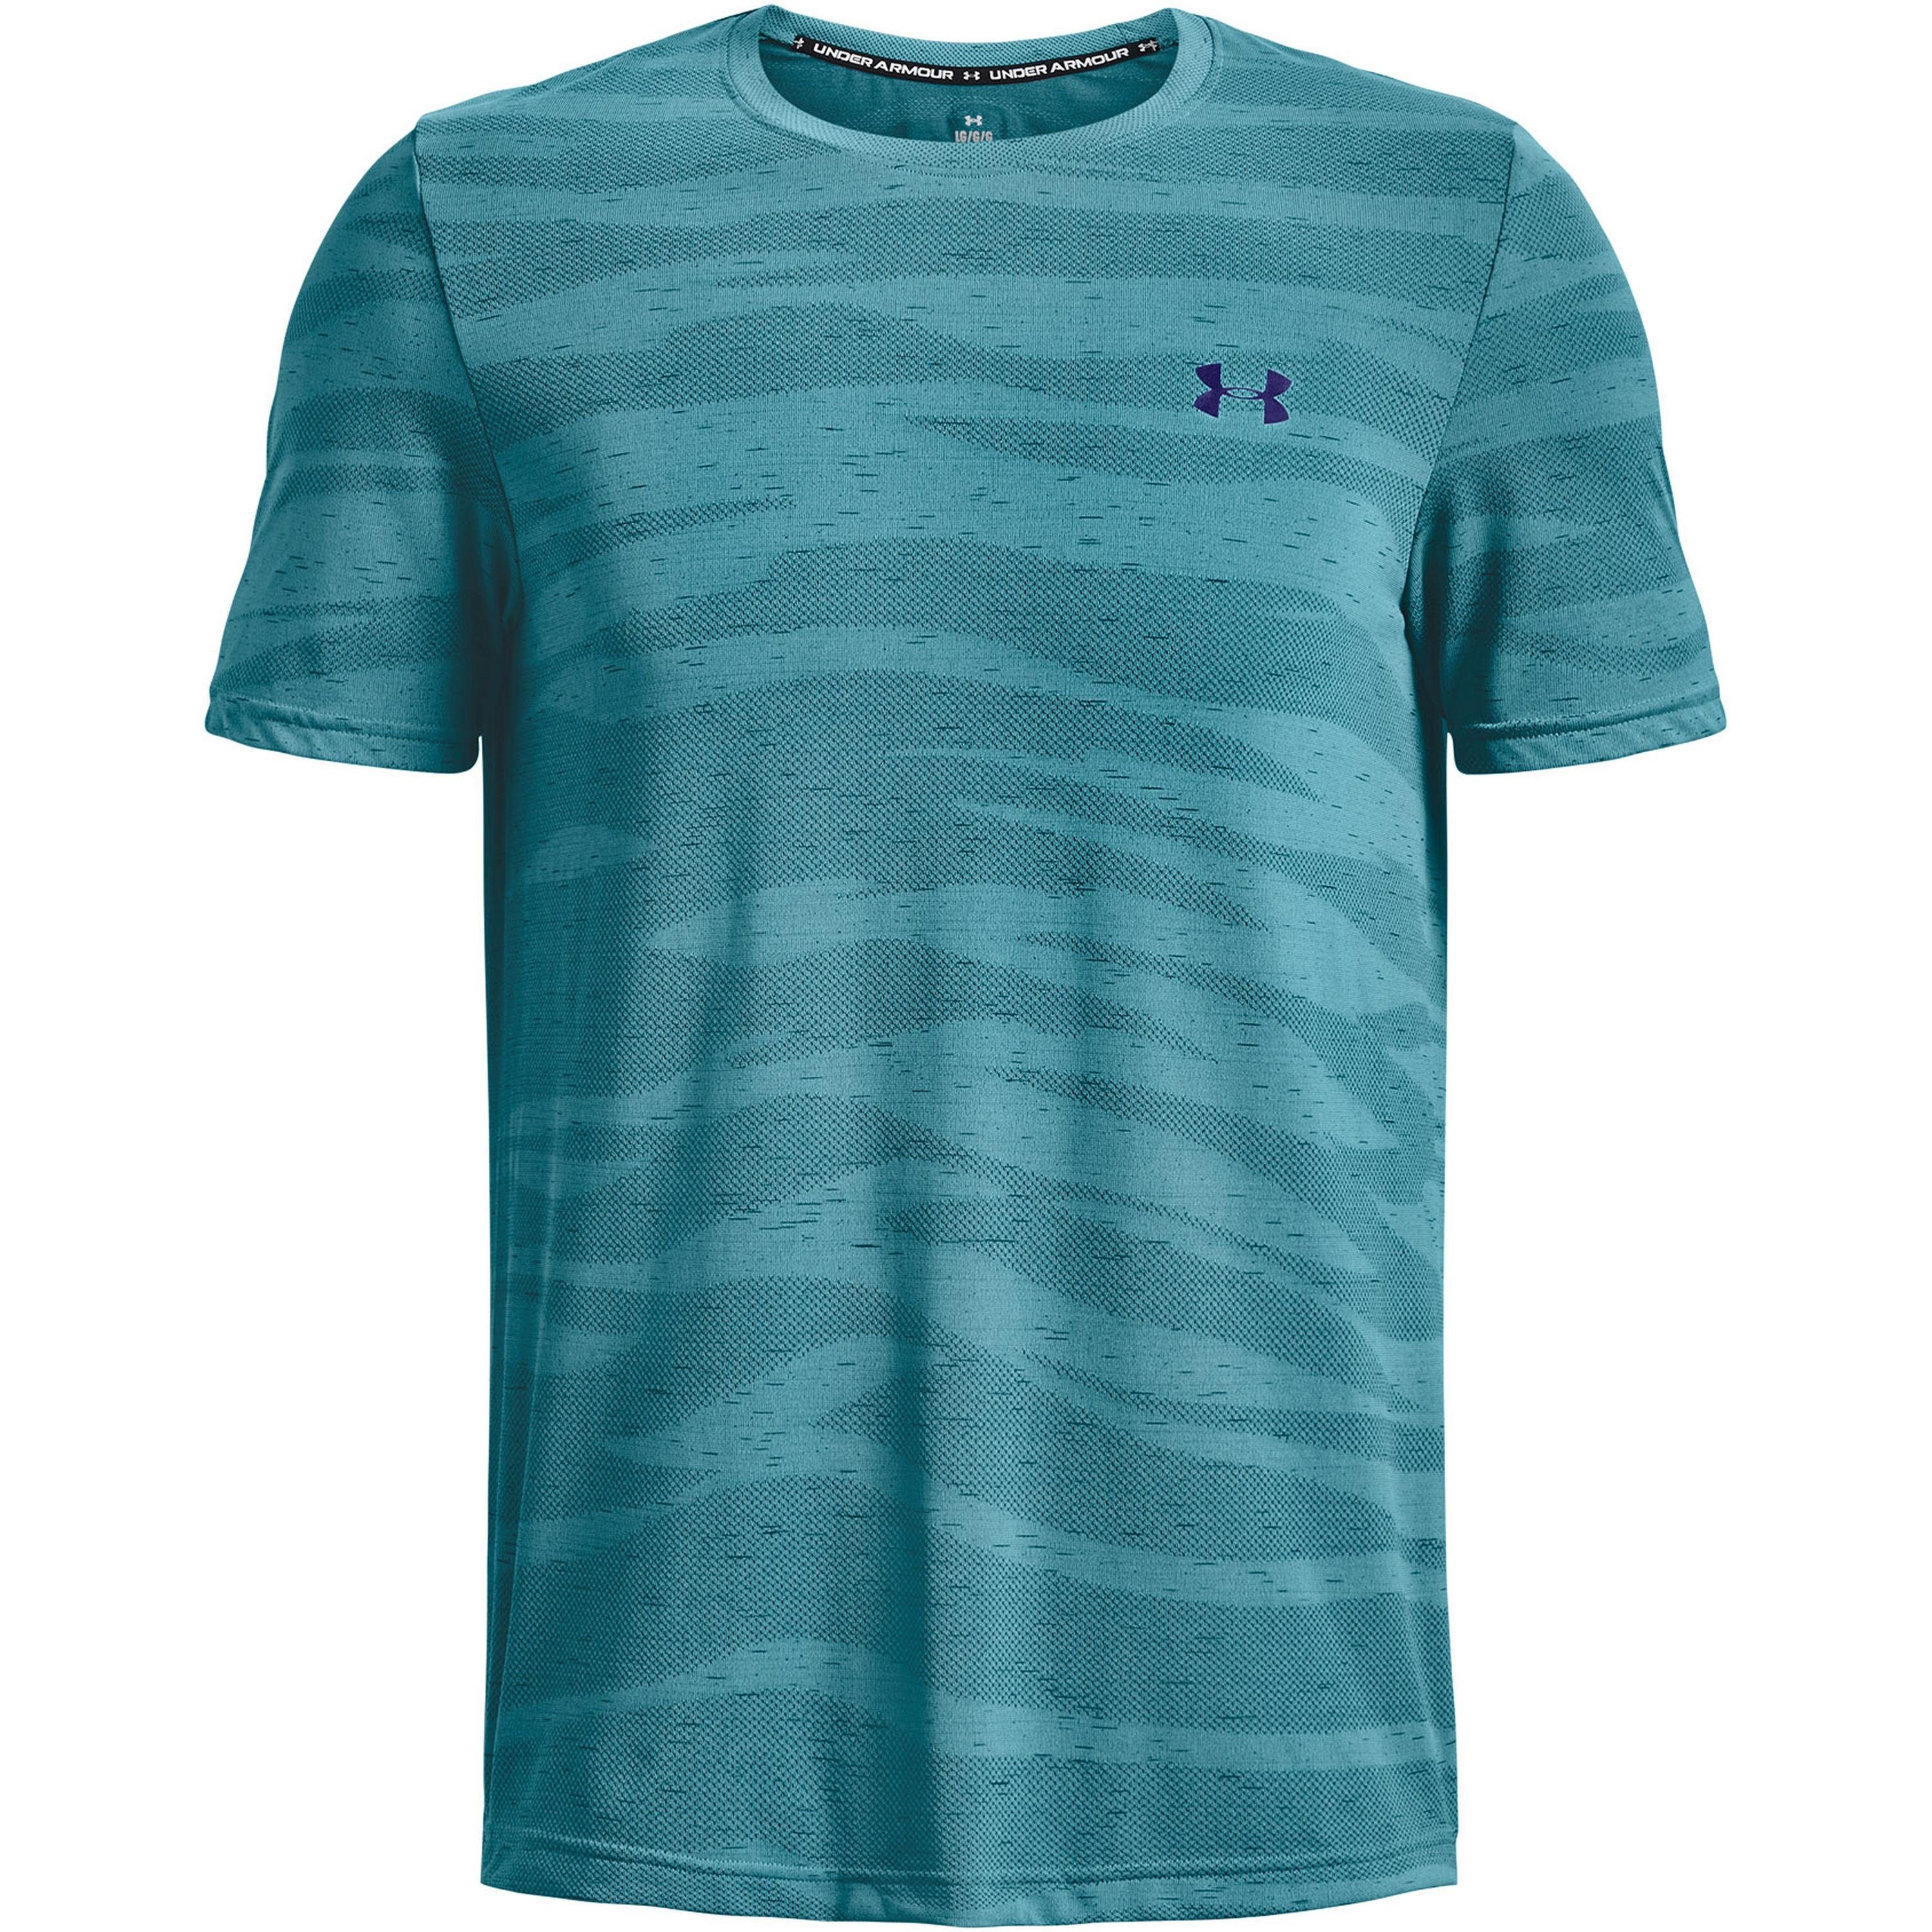 Under Armour® Funktionsshirt Seamless glacierblue-sonarblue